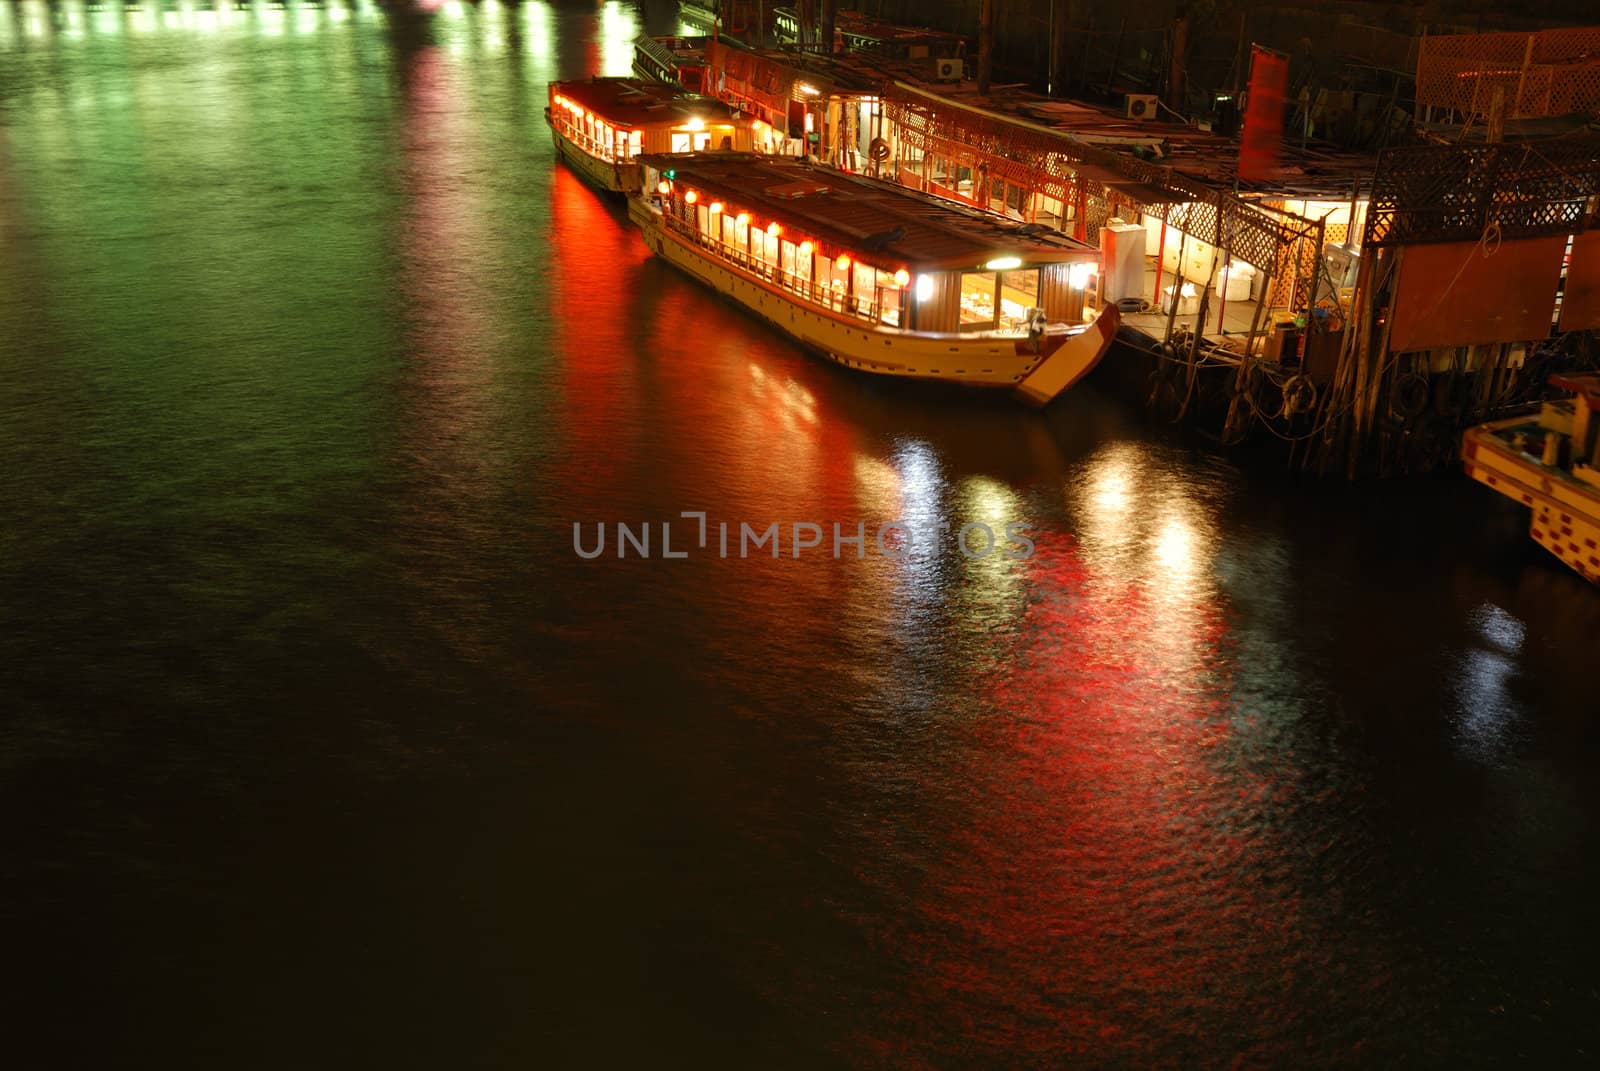 Japanese boat near pier in the night; boat is little blurred due to long exposure; pier is sharp,  Tokyo, Japan